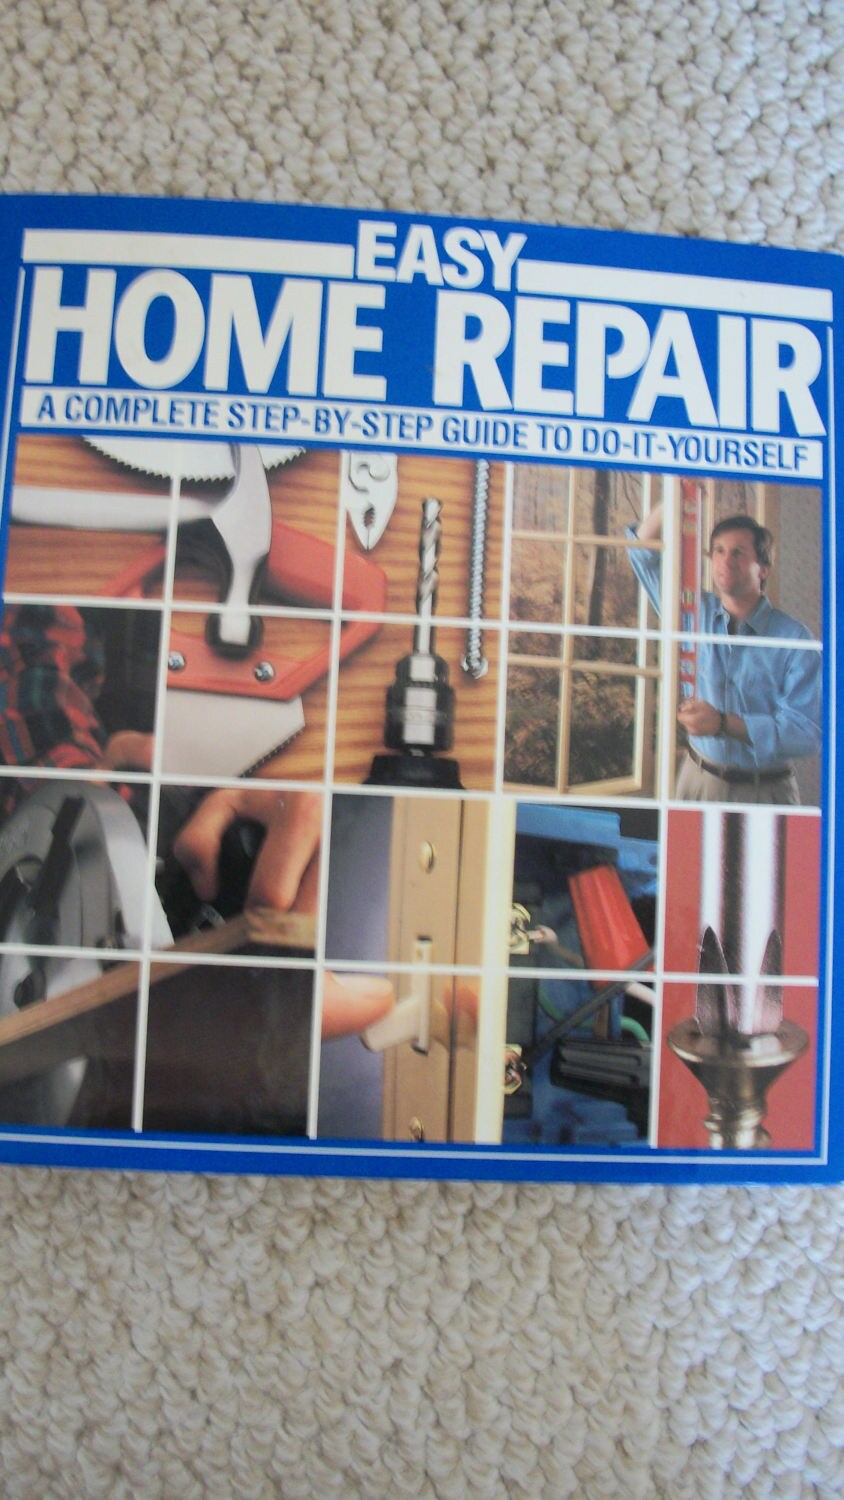 Black and Decker Complete Photo Guide to Home Repair in the Books